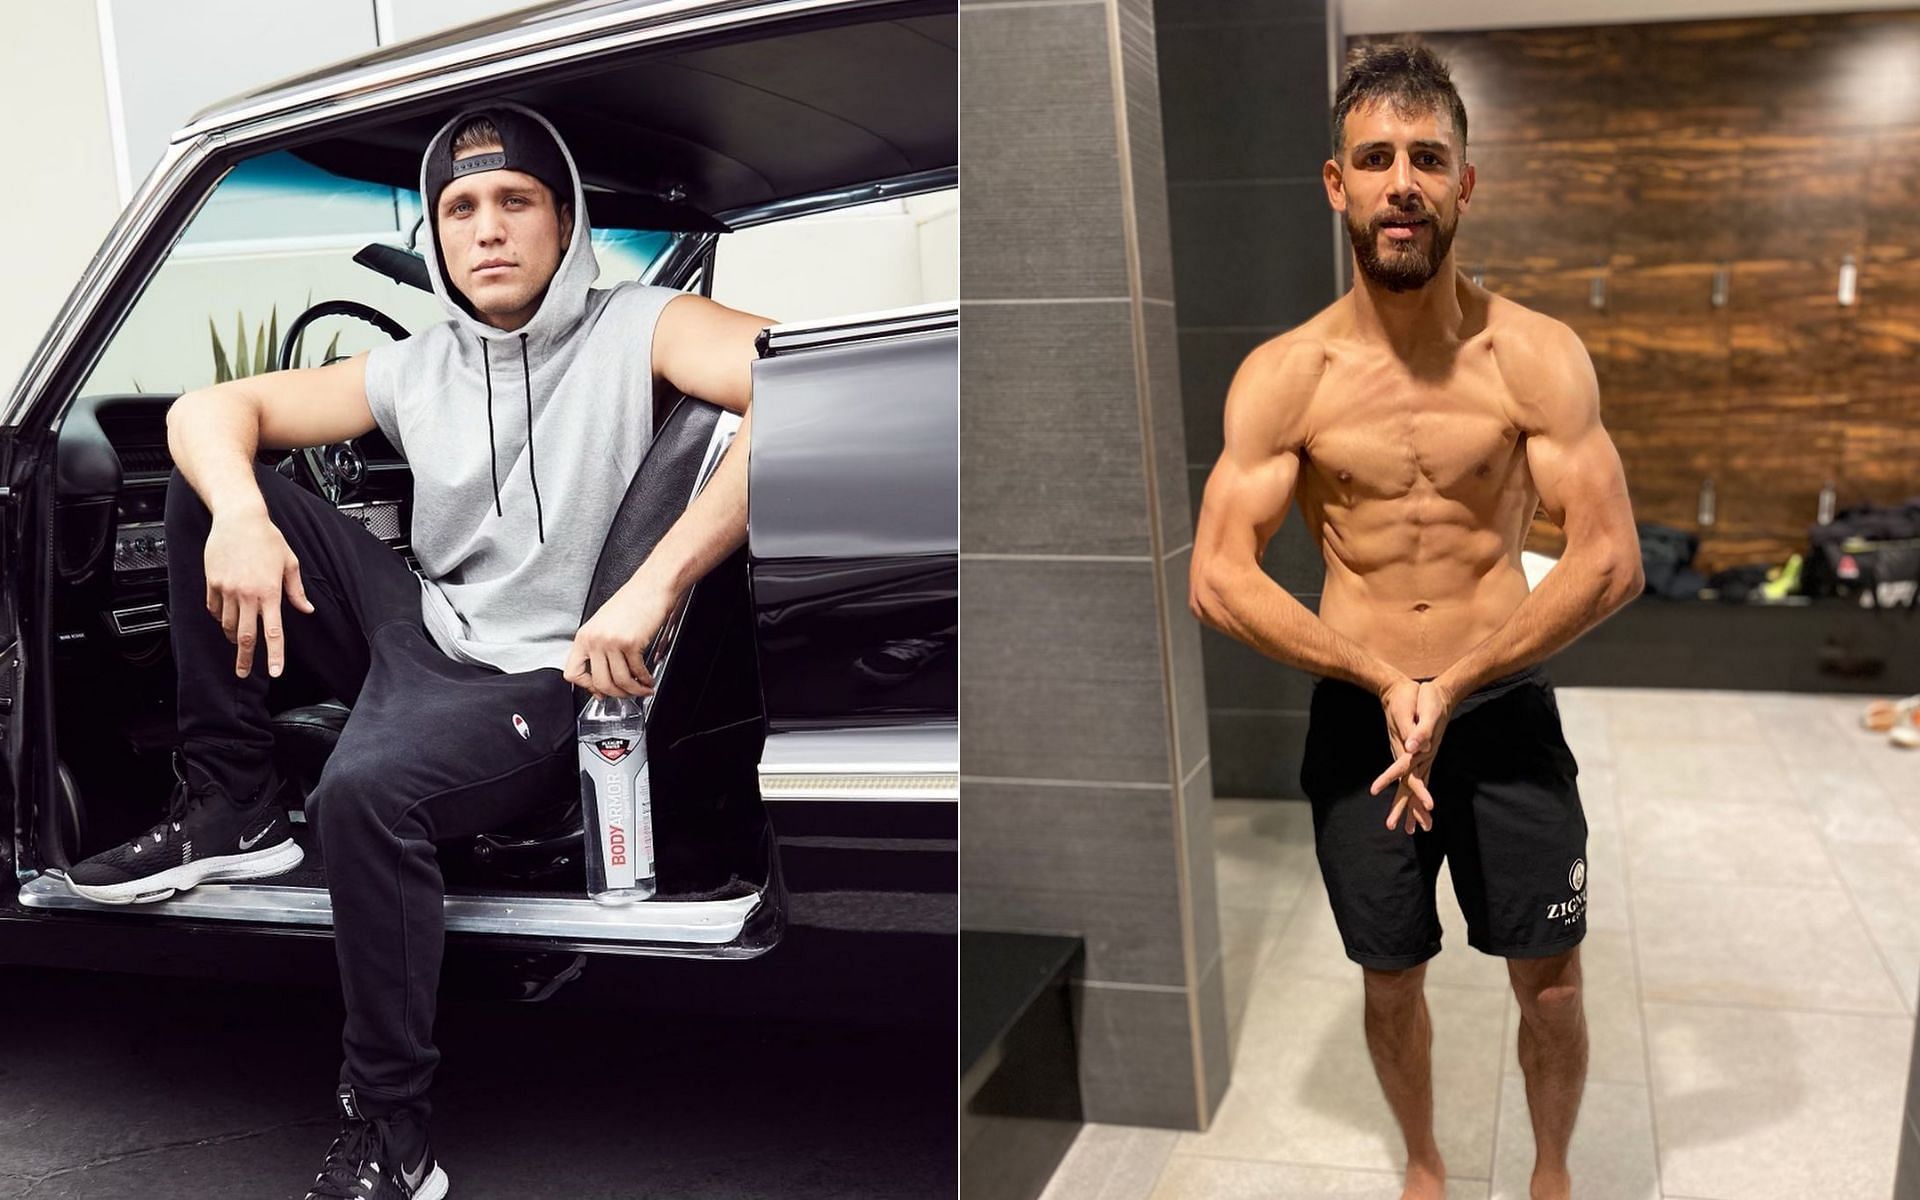 Brian Ortega (left) and Yair Rodriguez (right) [Images courtesy @briantcity Instagram and @panteraufc Instagram]